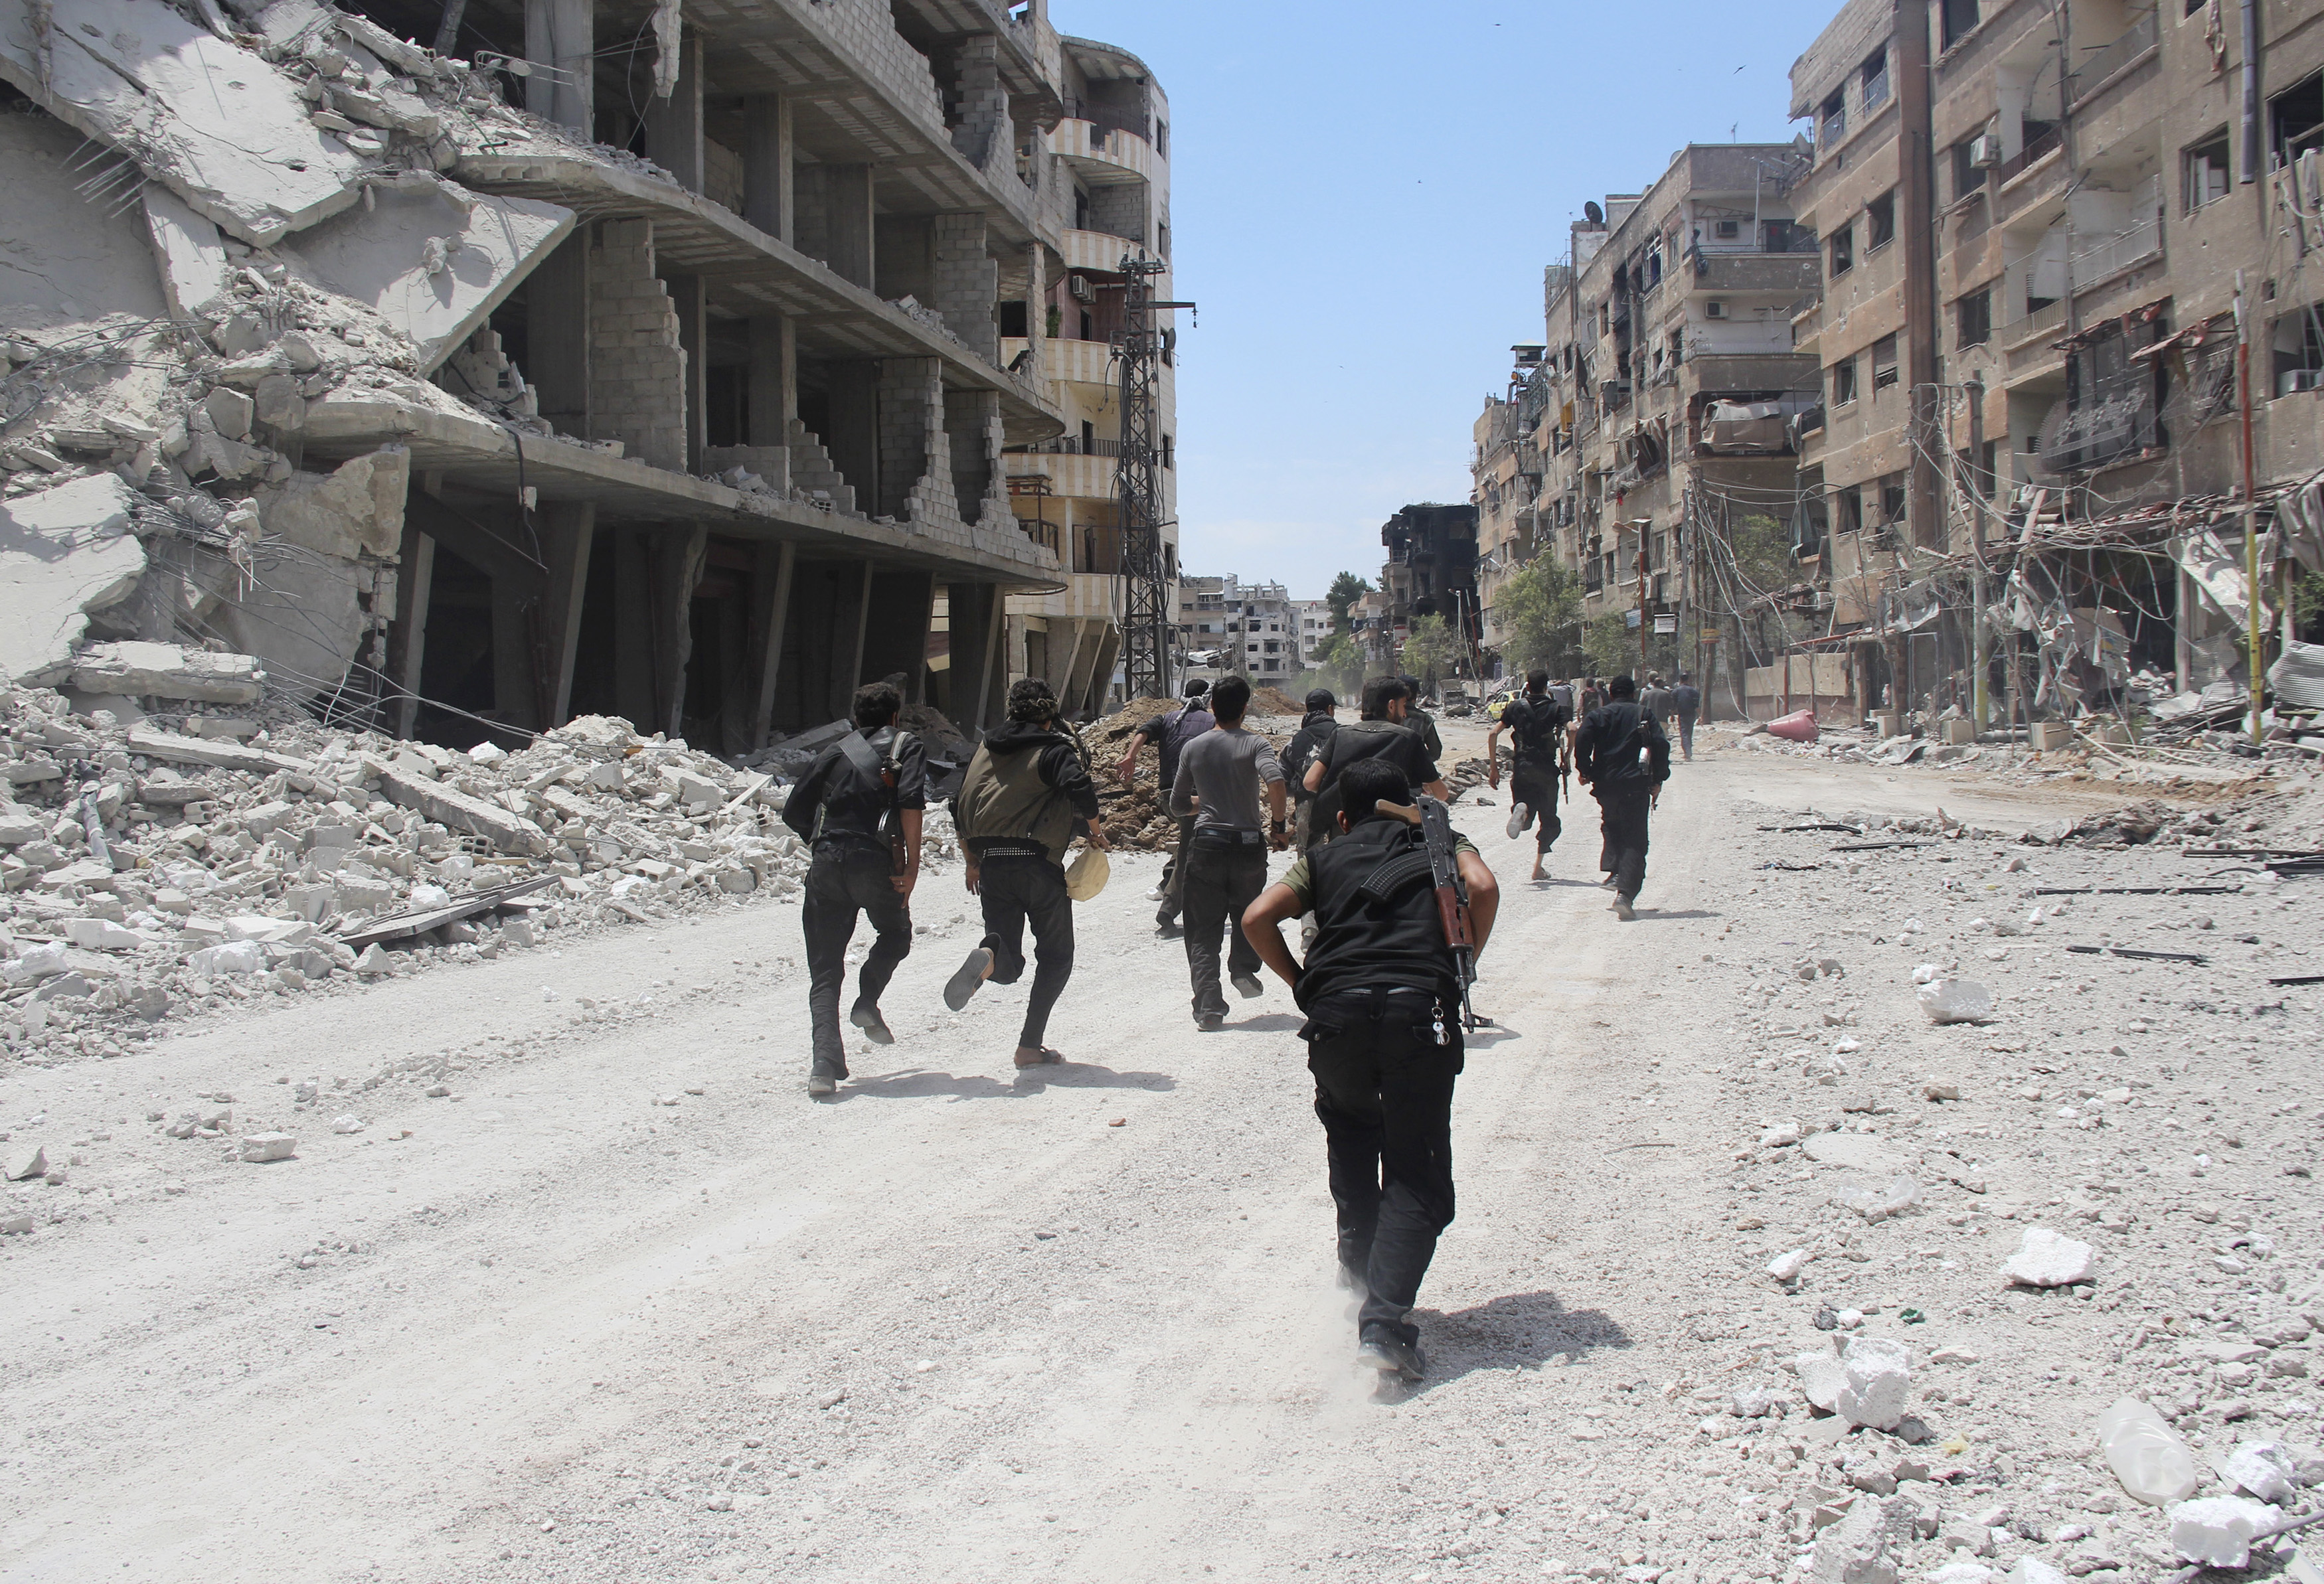 Rebel fighters carry their weapons as they run past damaged buildings to avoid snipers loyal to Syria's President Bashar al-Assad in the Mleha suburb of Damascus May 26, 2014. REUTERS/Badra Mamet (SYRIA - Tags: POLITICS CIVIL UNREST CONFLICT MILITARY) - RTR3QXRJ (Badra Mamet—Reuters)